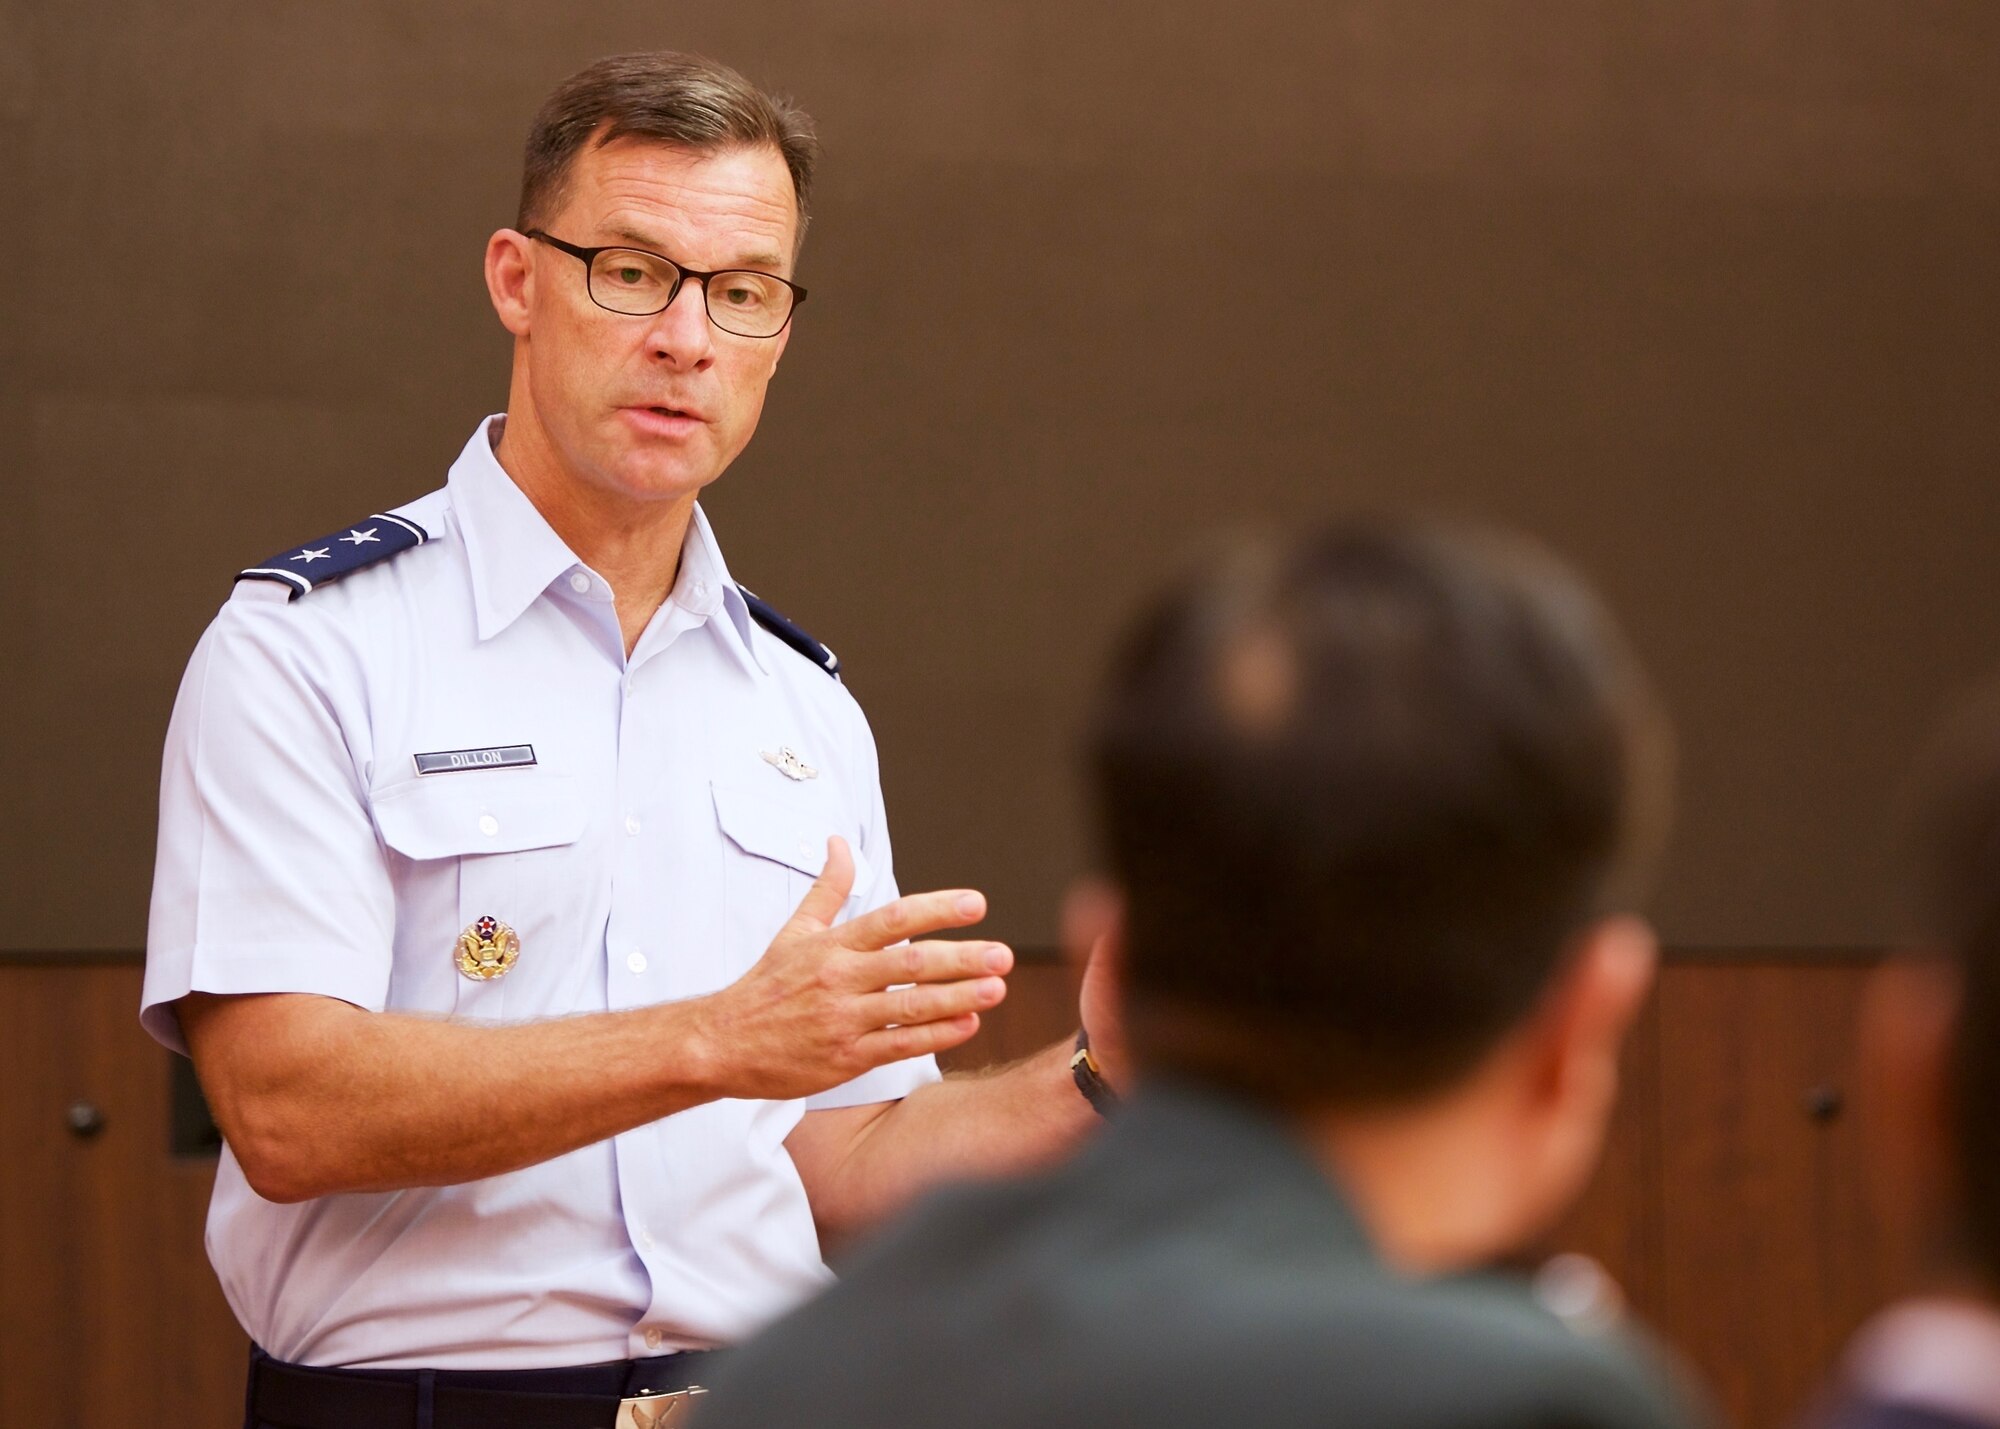 U.S. Air Force Maj. Gen. Mark C. Dillon, Pacific Air Forces vice commander, participates in a question and answer session during the Republic of Korea's National Assembly Defense Commitee's visit to PACAF, Joint Base Pearl Harbor-Hickam, Hawaii, Dec. 14, 2015. Dillon discussed U.S. and ROK defense policy issues to strengthen and enhance both nations' capabilities and readiness during crises. (U.S. Air Force photo by Tech. Sgt. James Stewart/Released)